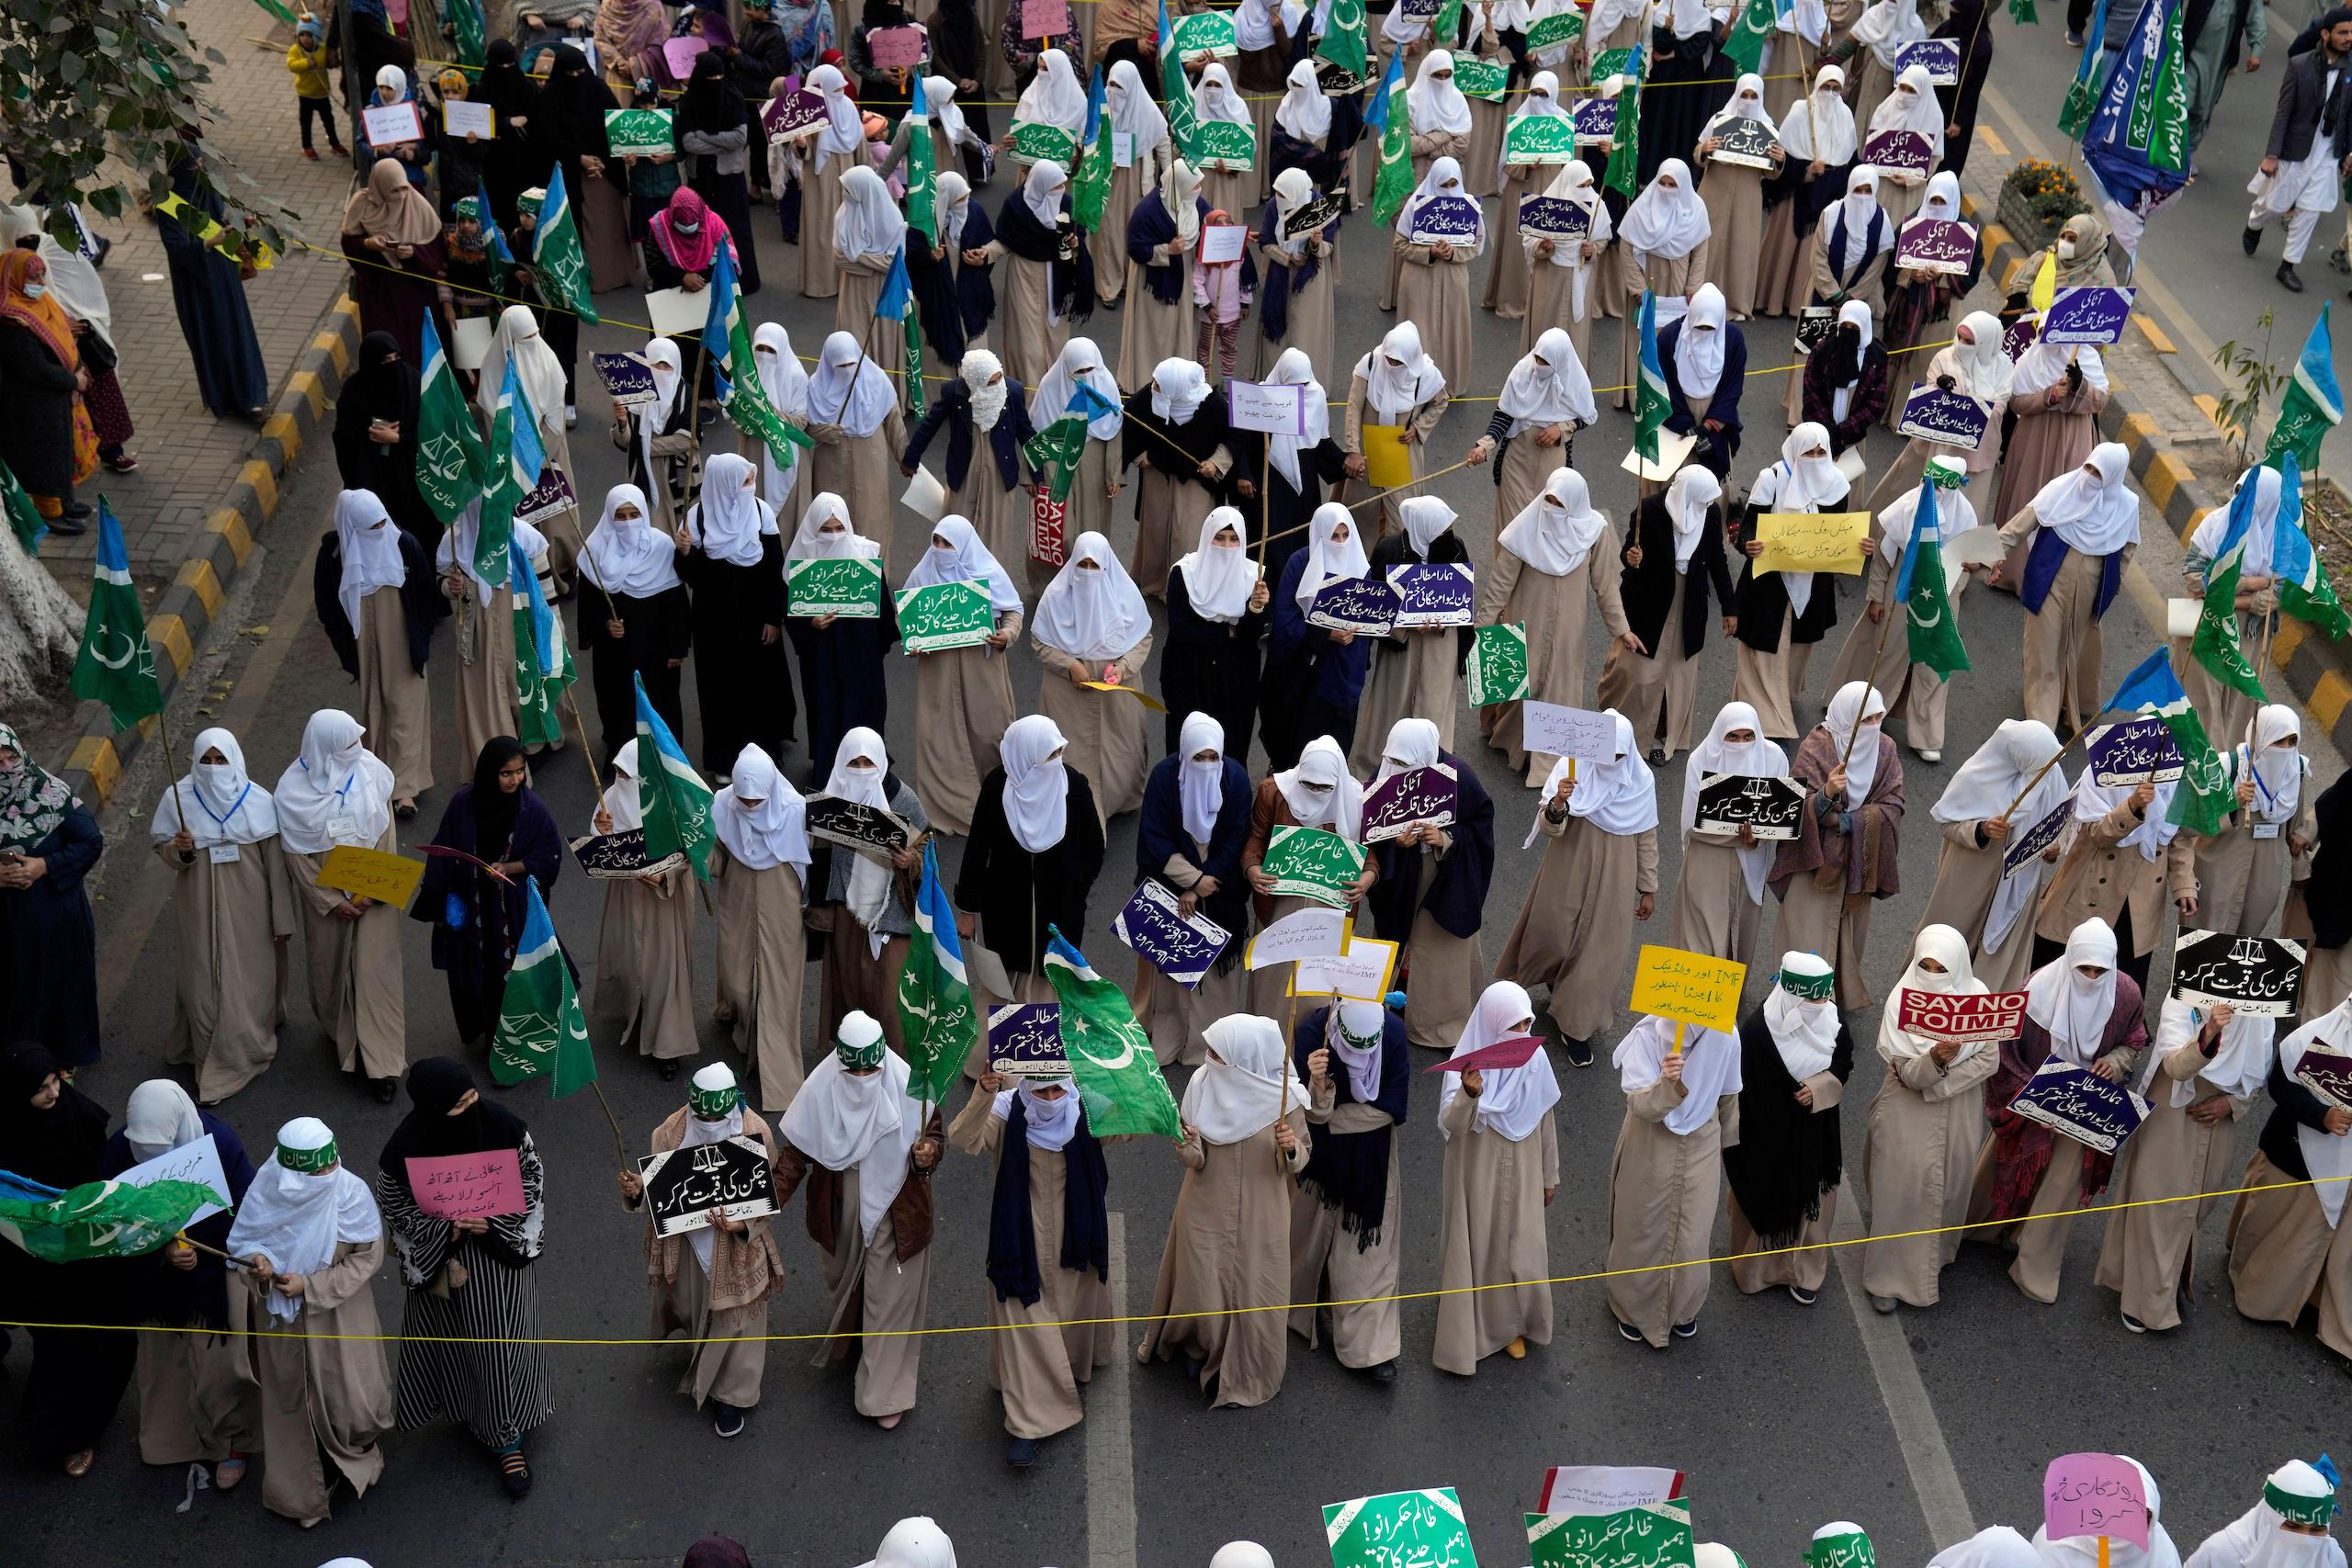 Group of women wearing headscarves, walking on the street and holding signs for a rally